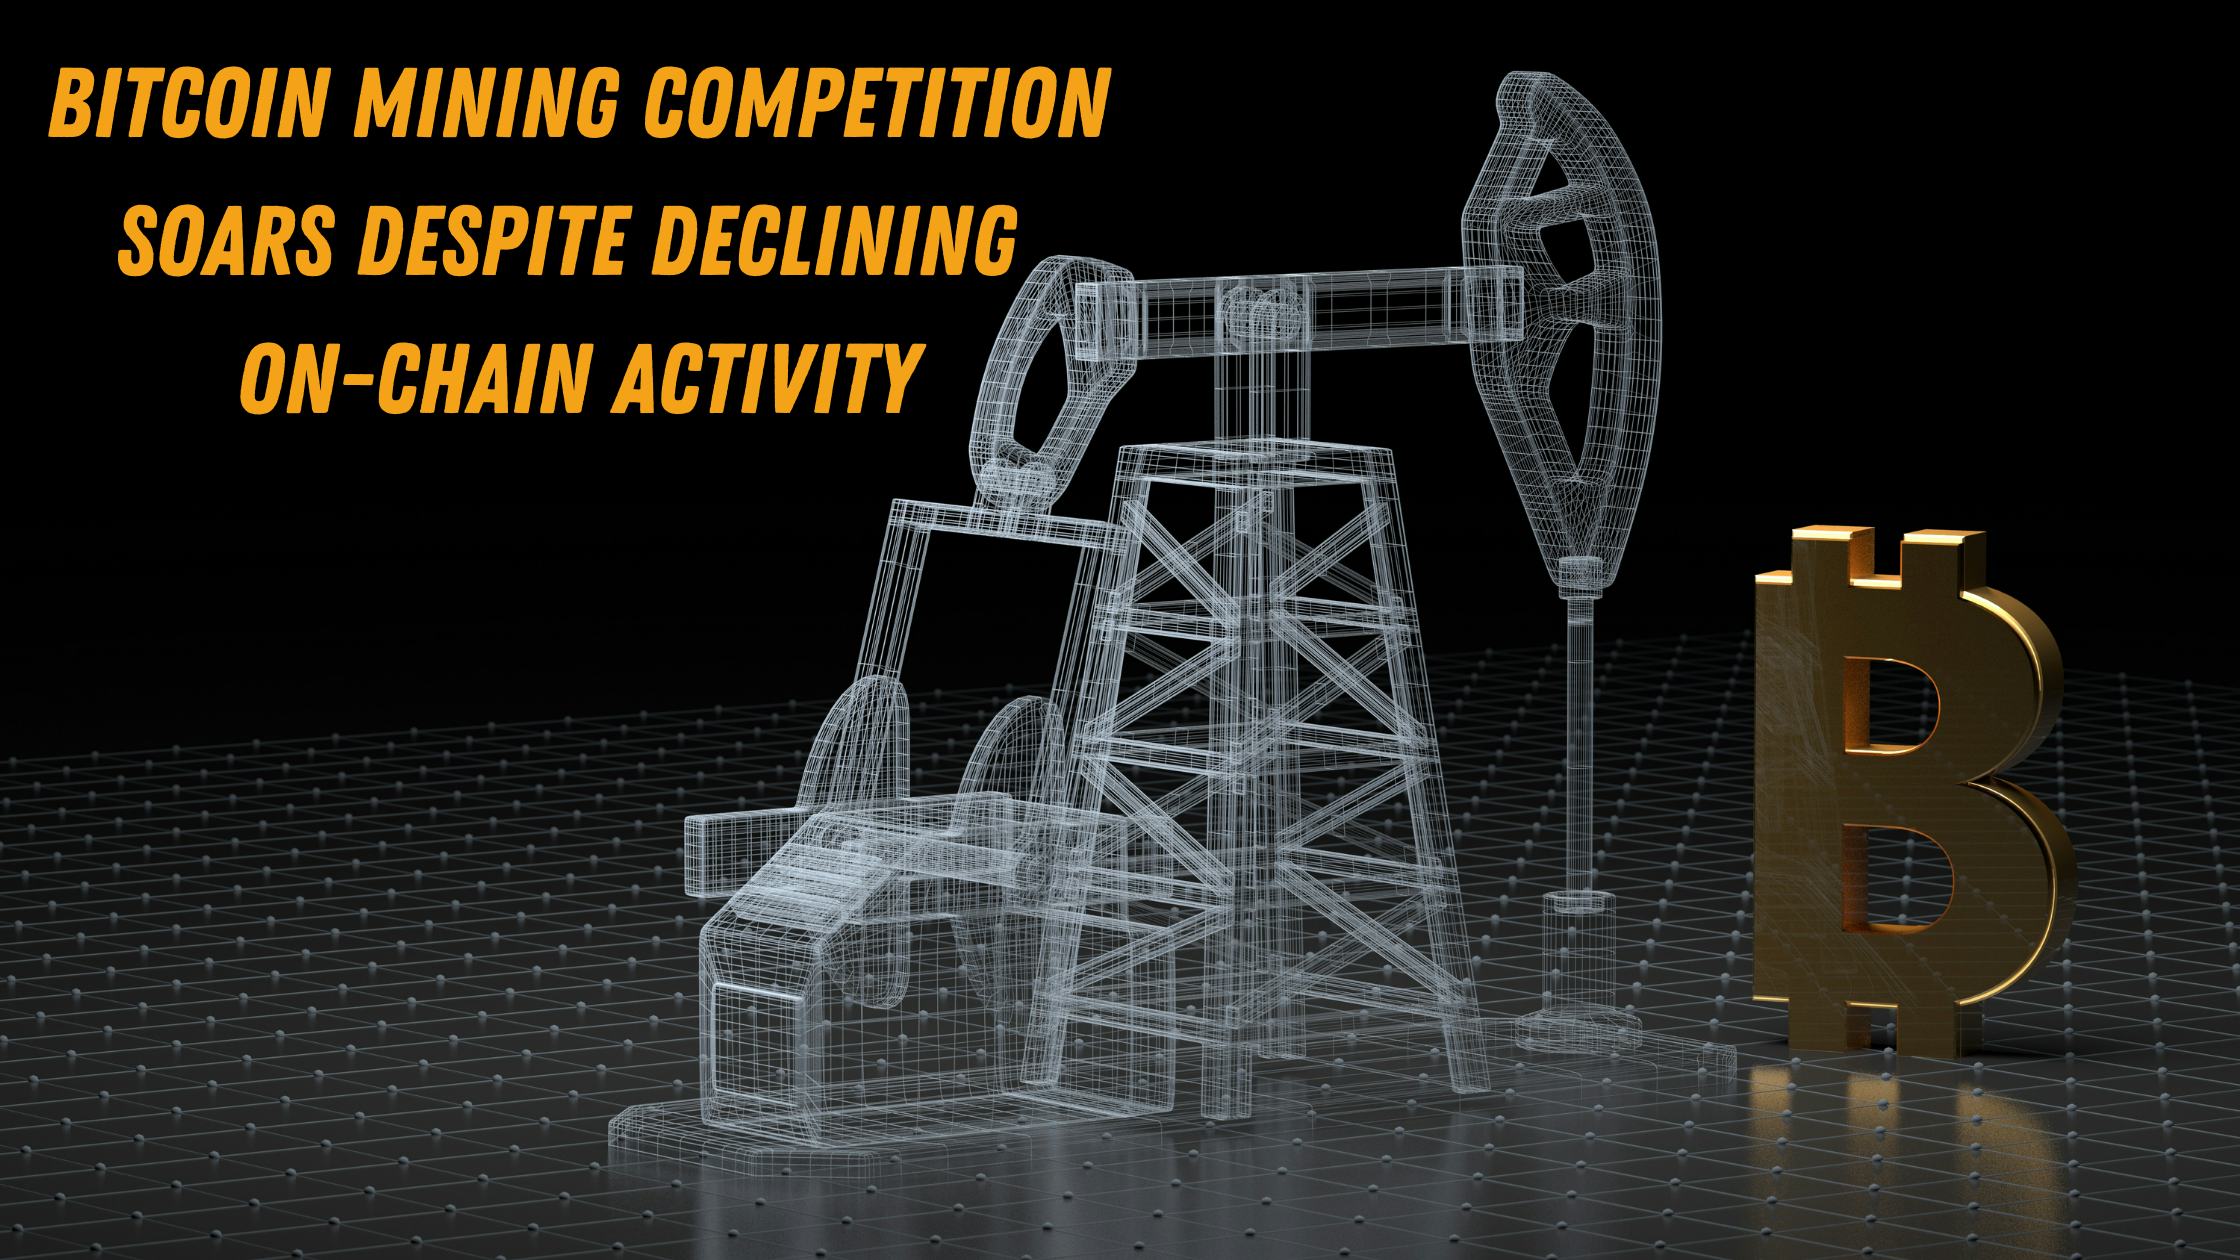 Bitcoin Mining Competition Soars Despite Declining On-Chain Activity